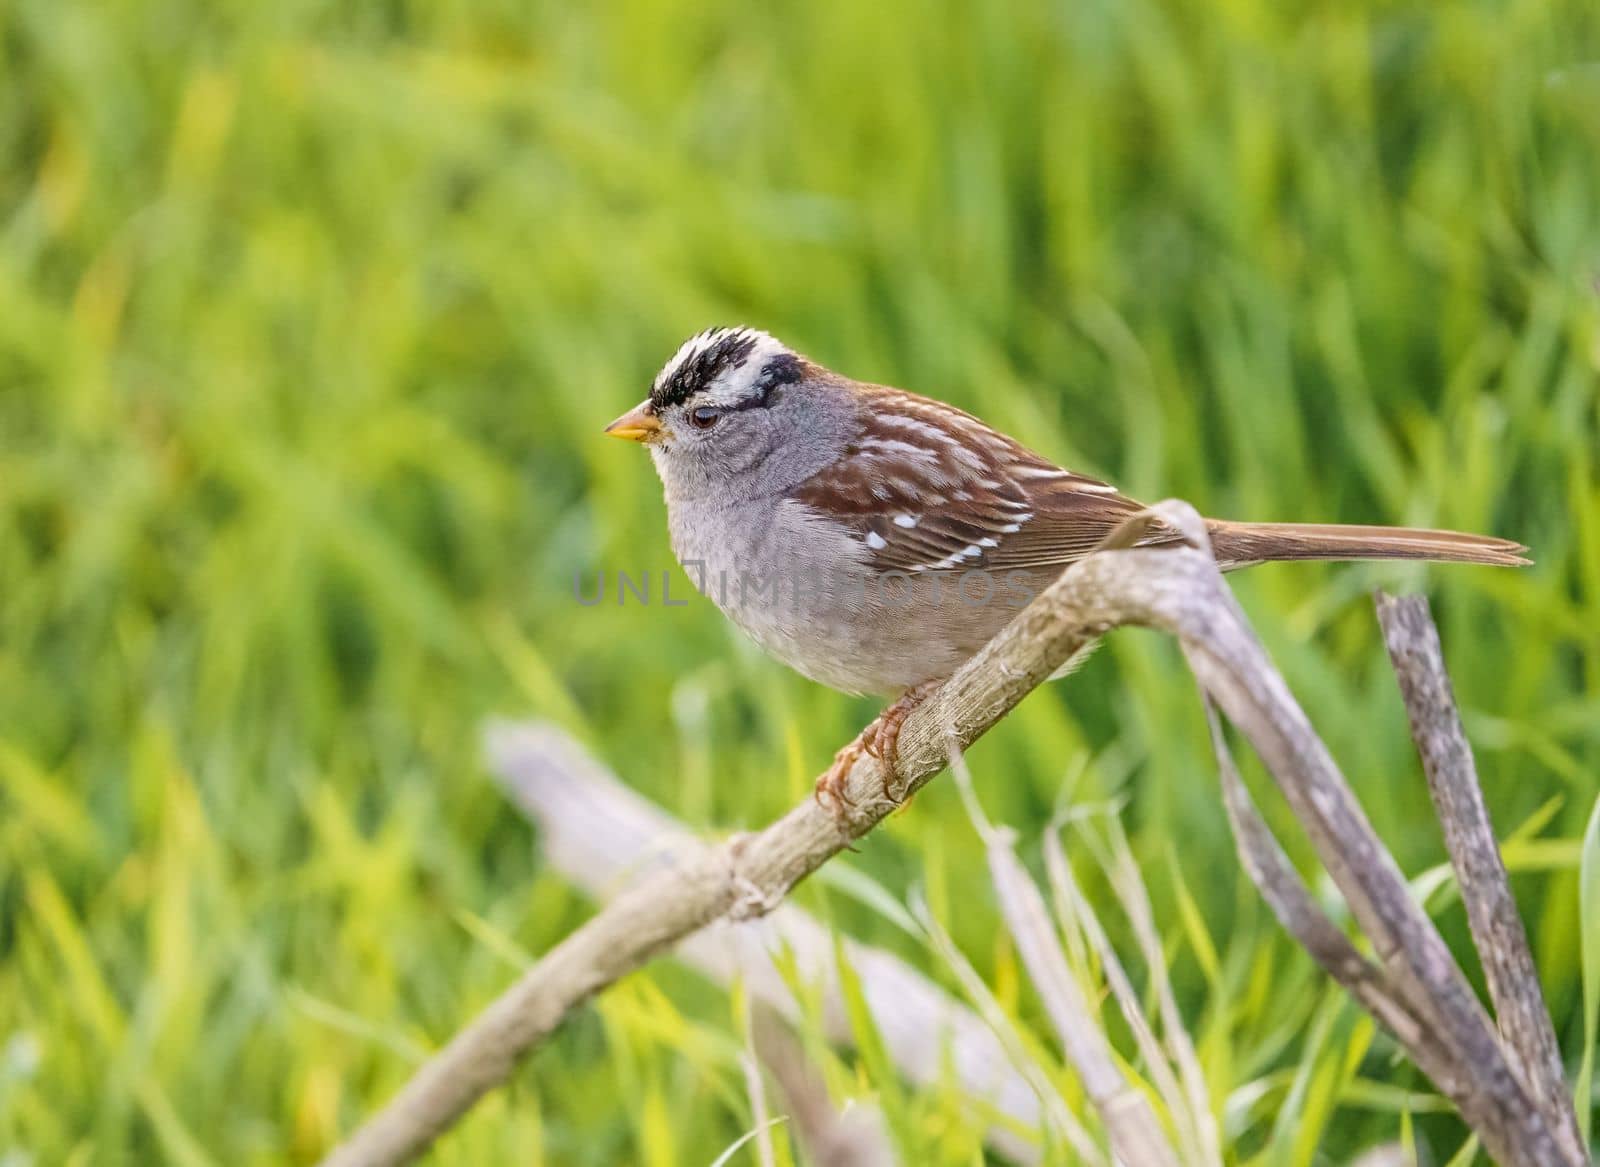 White Crowned Sparrow perched on reeds in the Bay area by Rajh_Photography